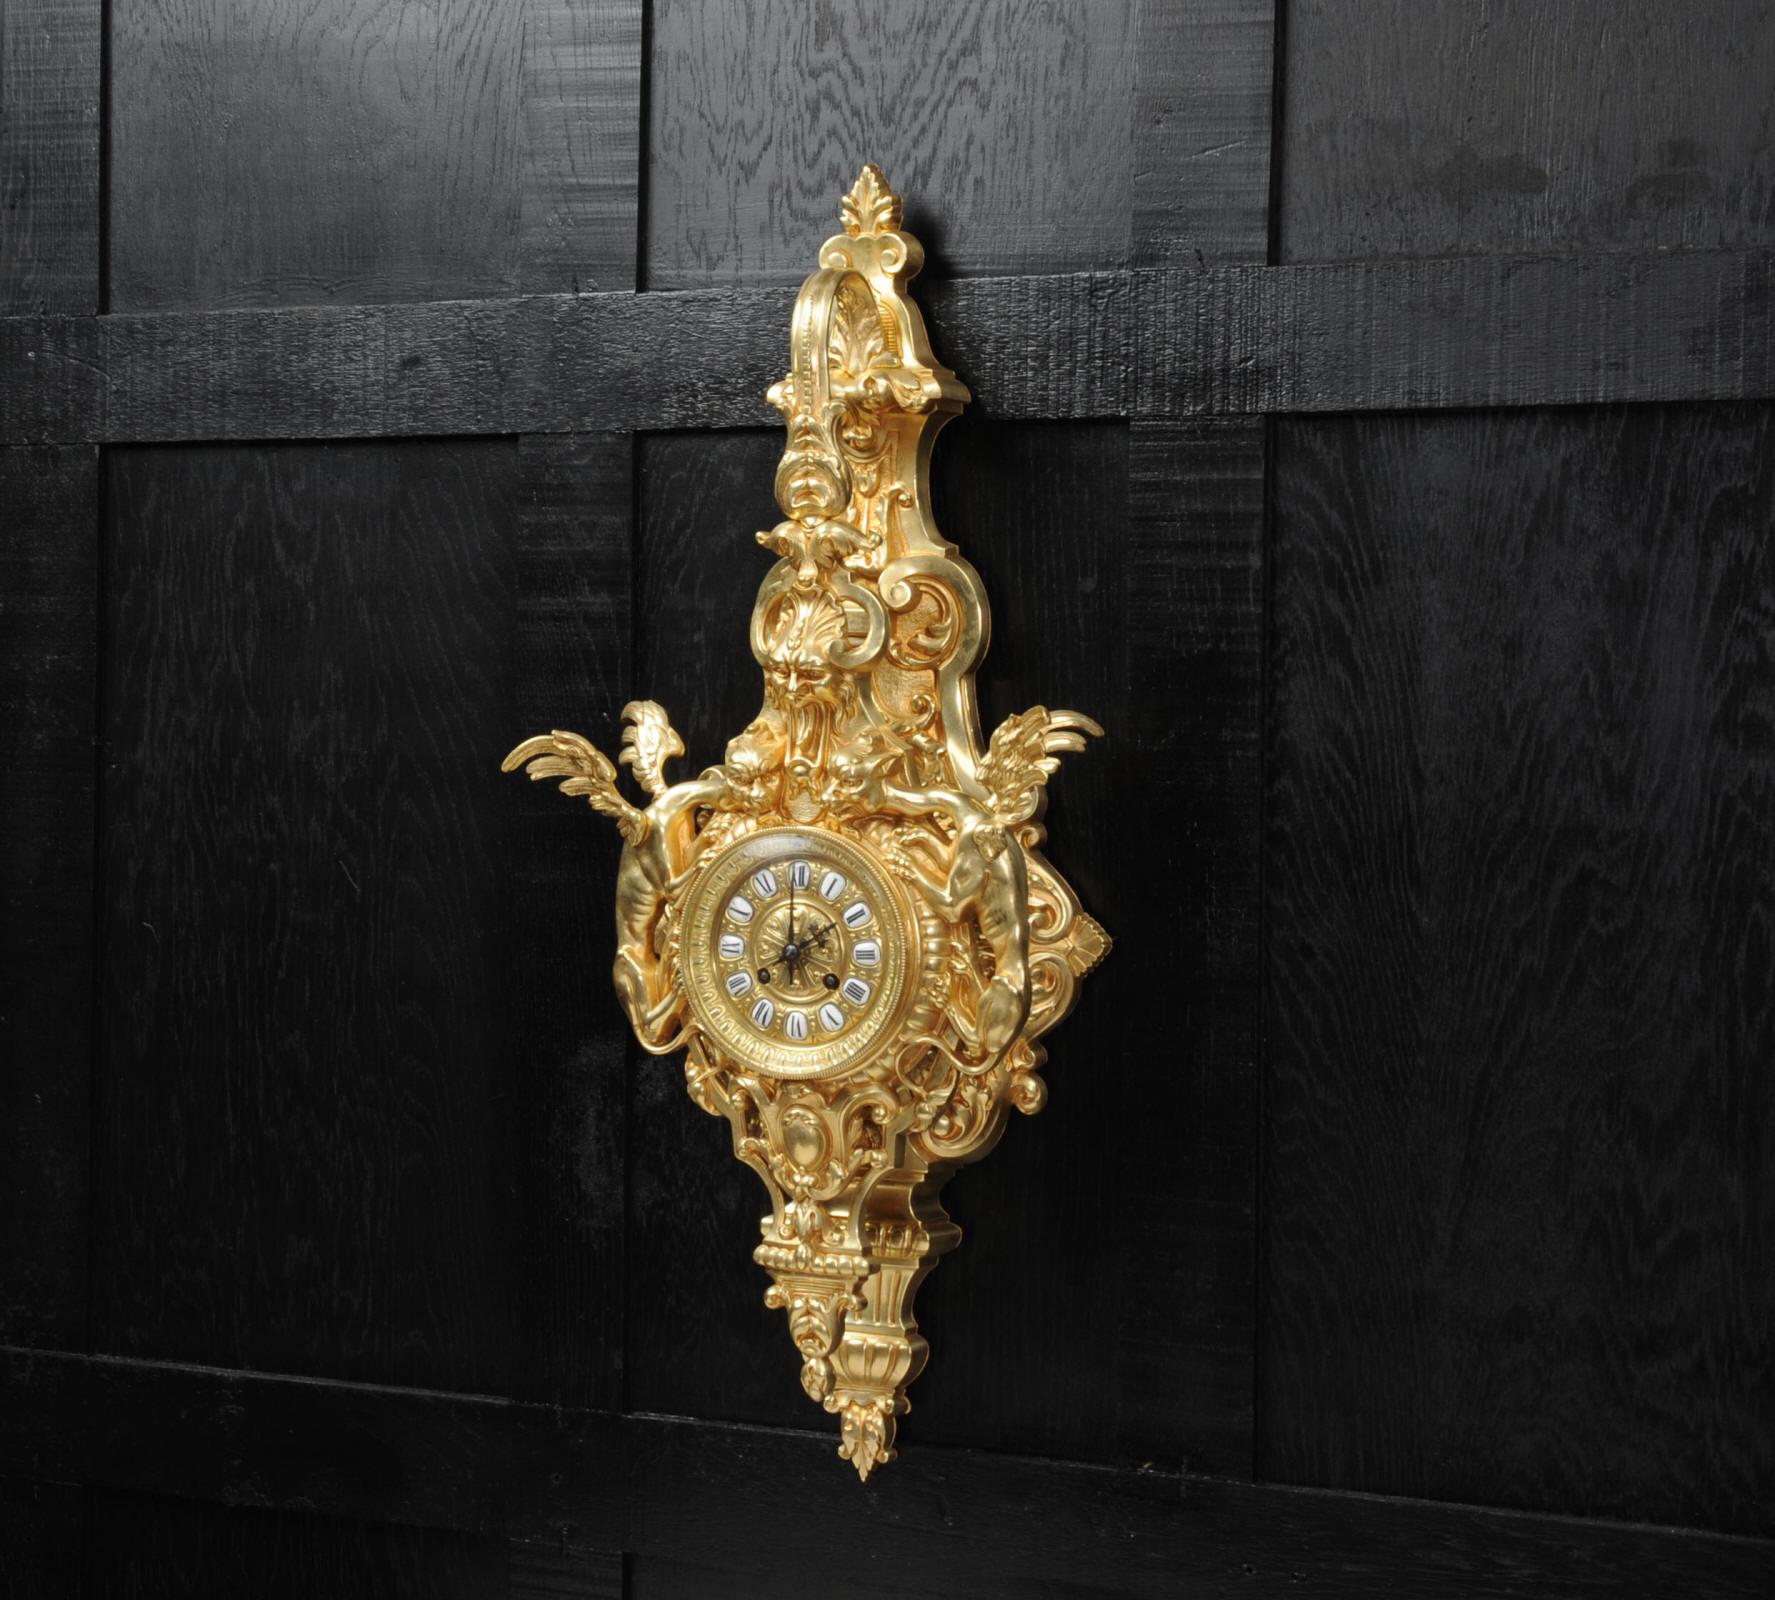 A wonderful and rare Gothic Cartel clock, circa 1870, beautifully modelled in gilt bronze. Chronos the god of time holds the clock from a bracket while the winged hounds of the devil creep up on the clock or time itself. The dial is also gilt bronze